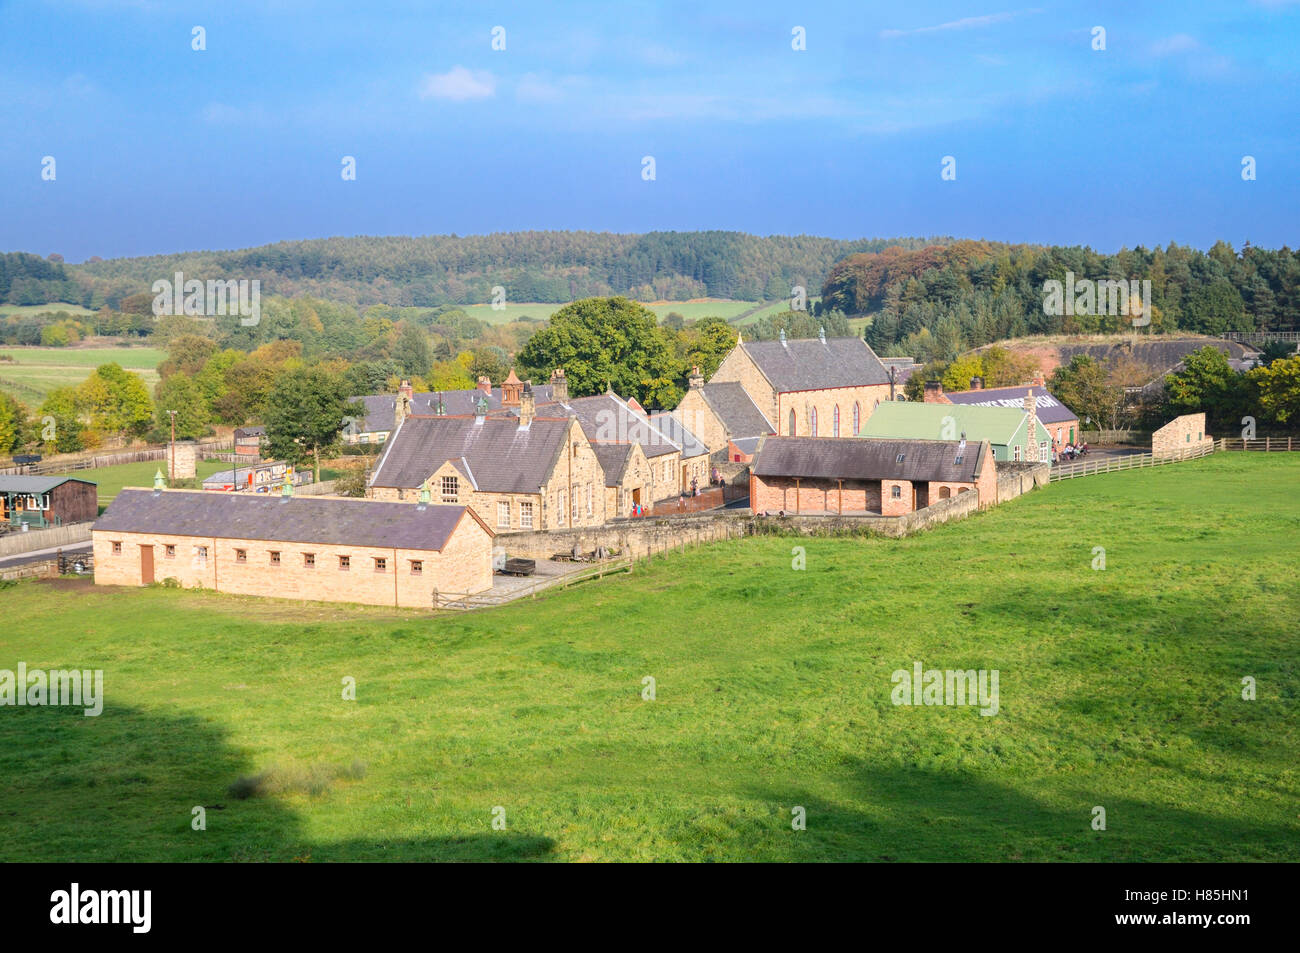 Beamish Open Air Museum, County Durham, Nord-Ost-England, UK Stockfoto